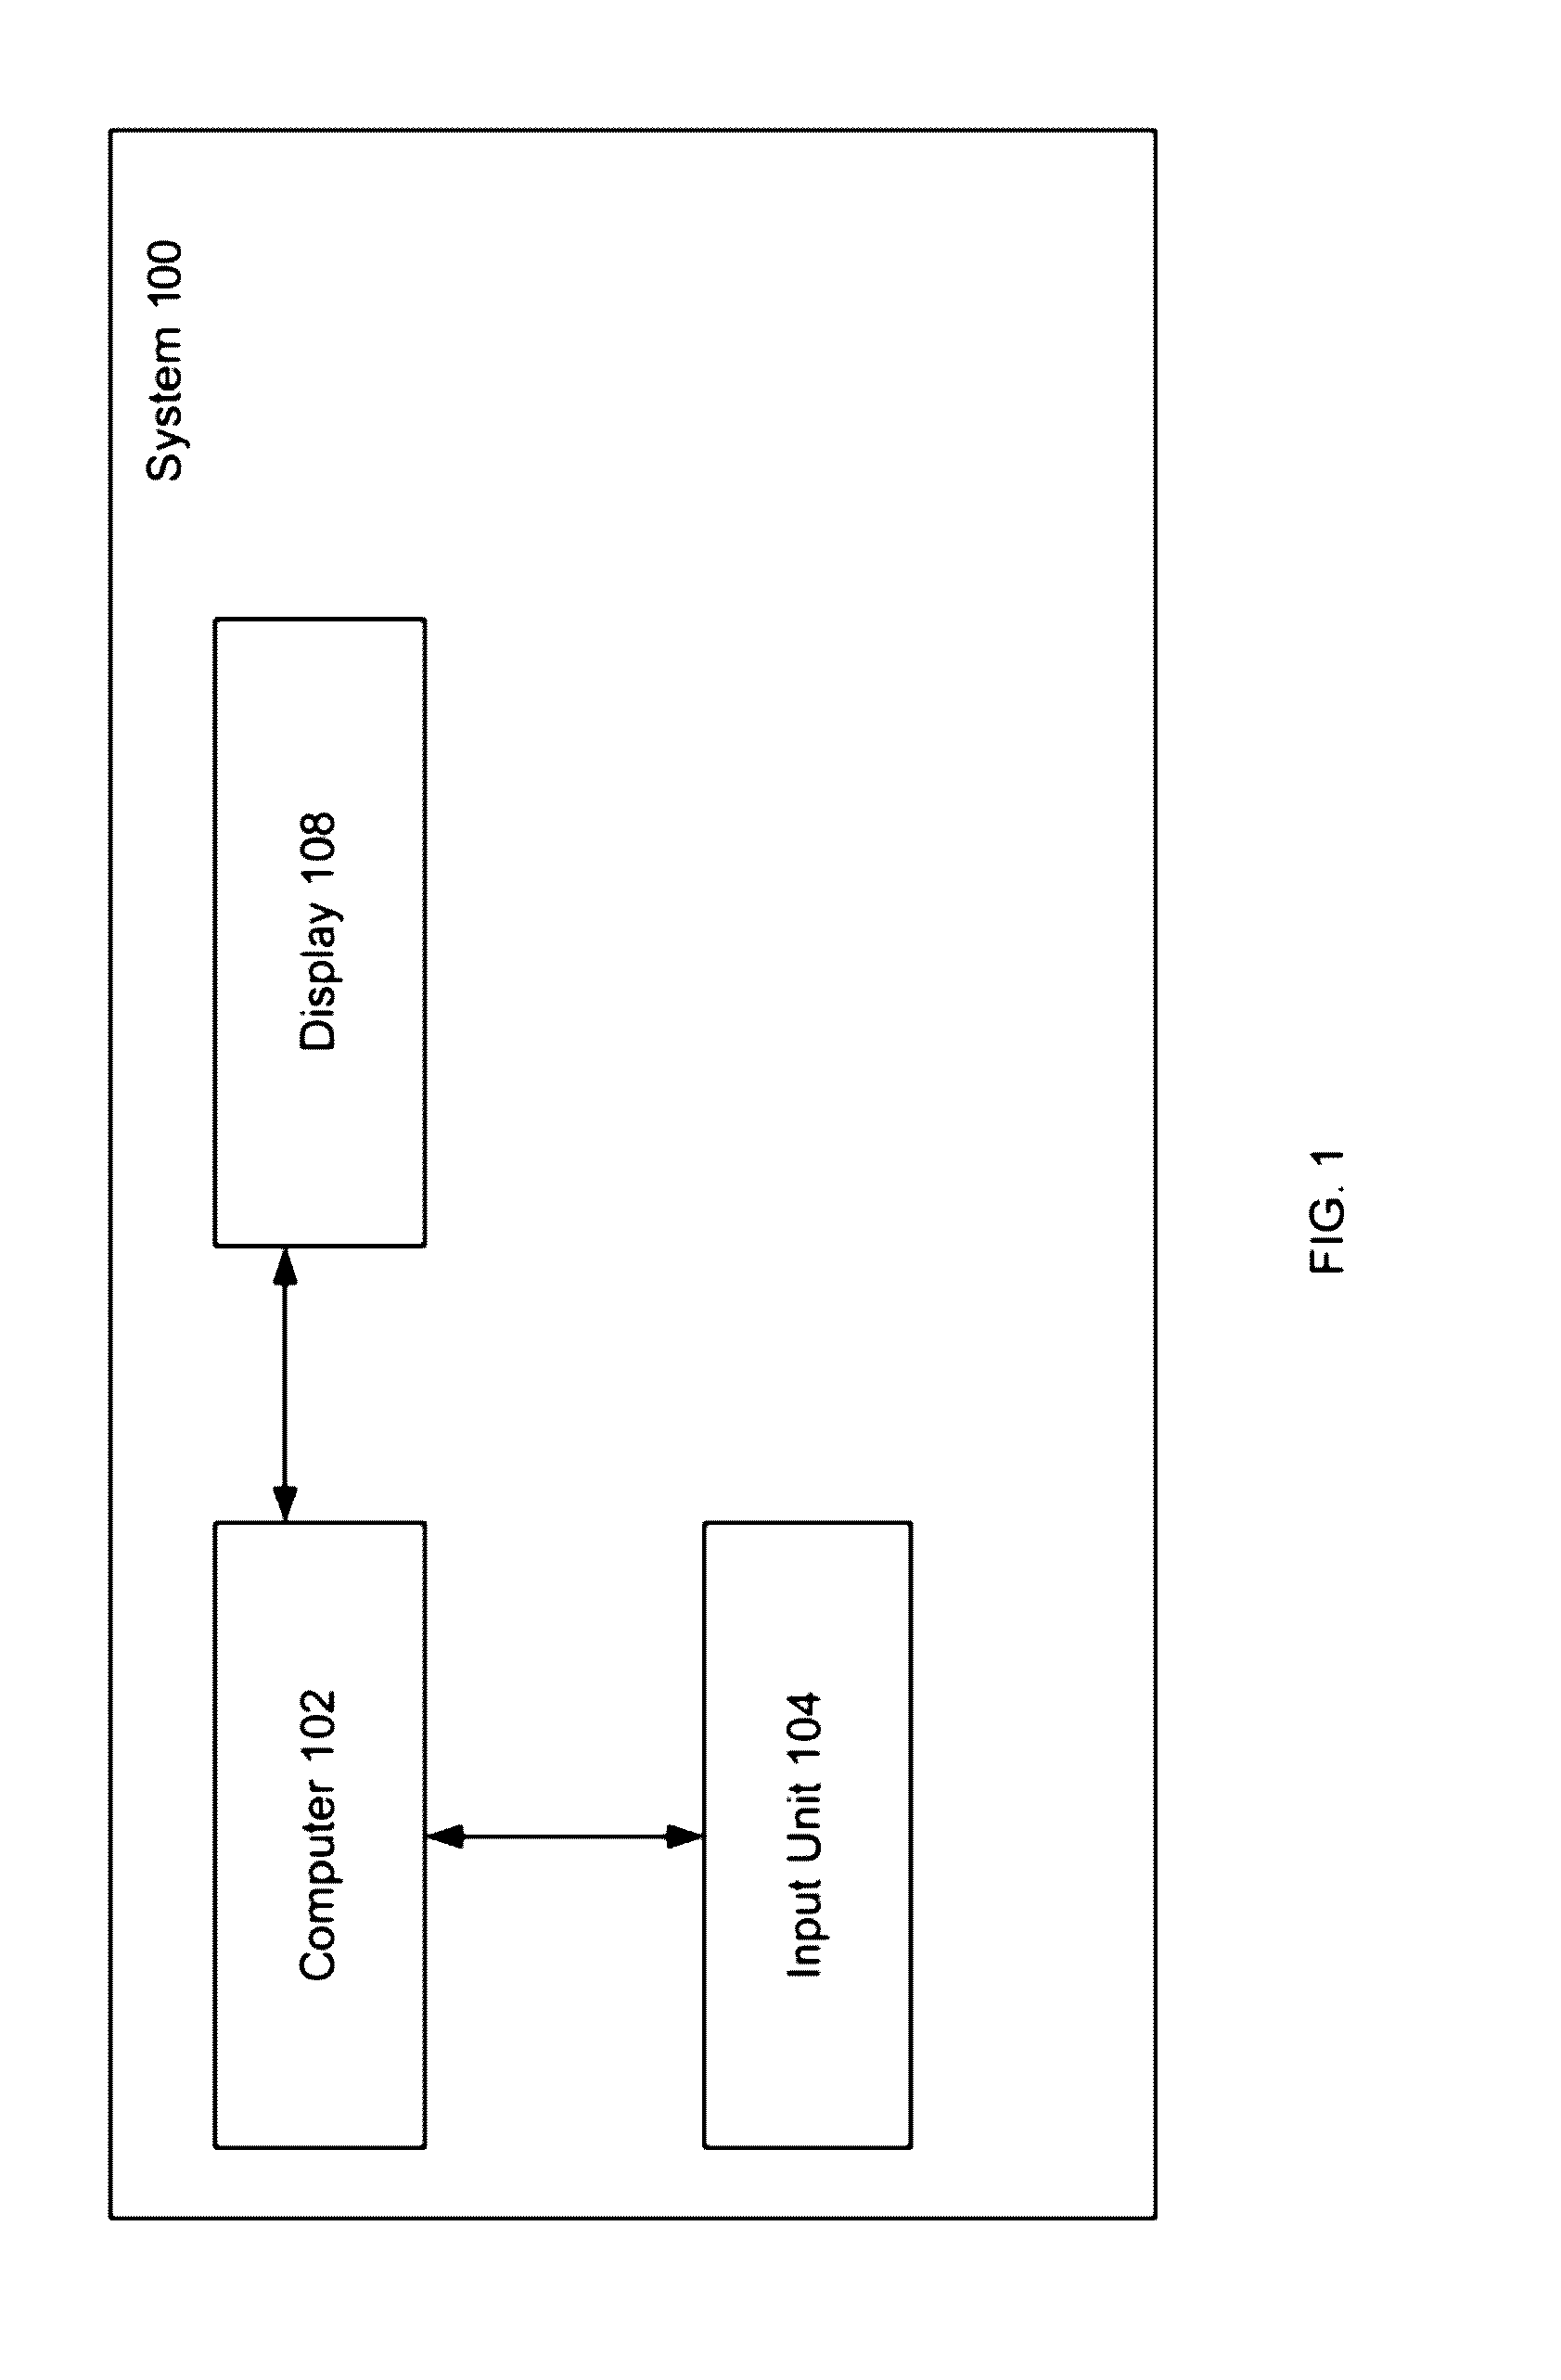 System and method for providing substantially stable haptics